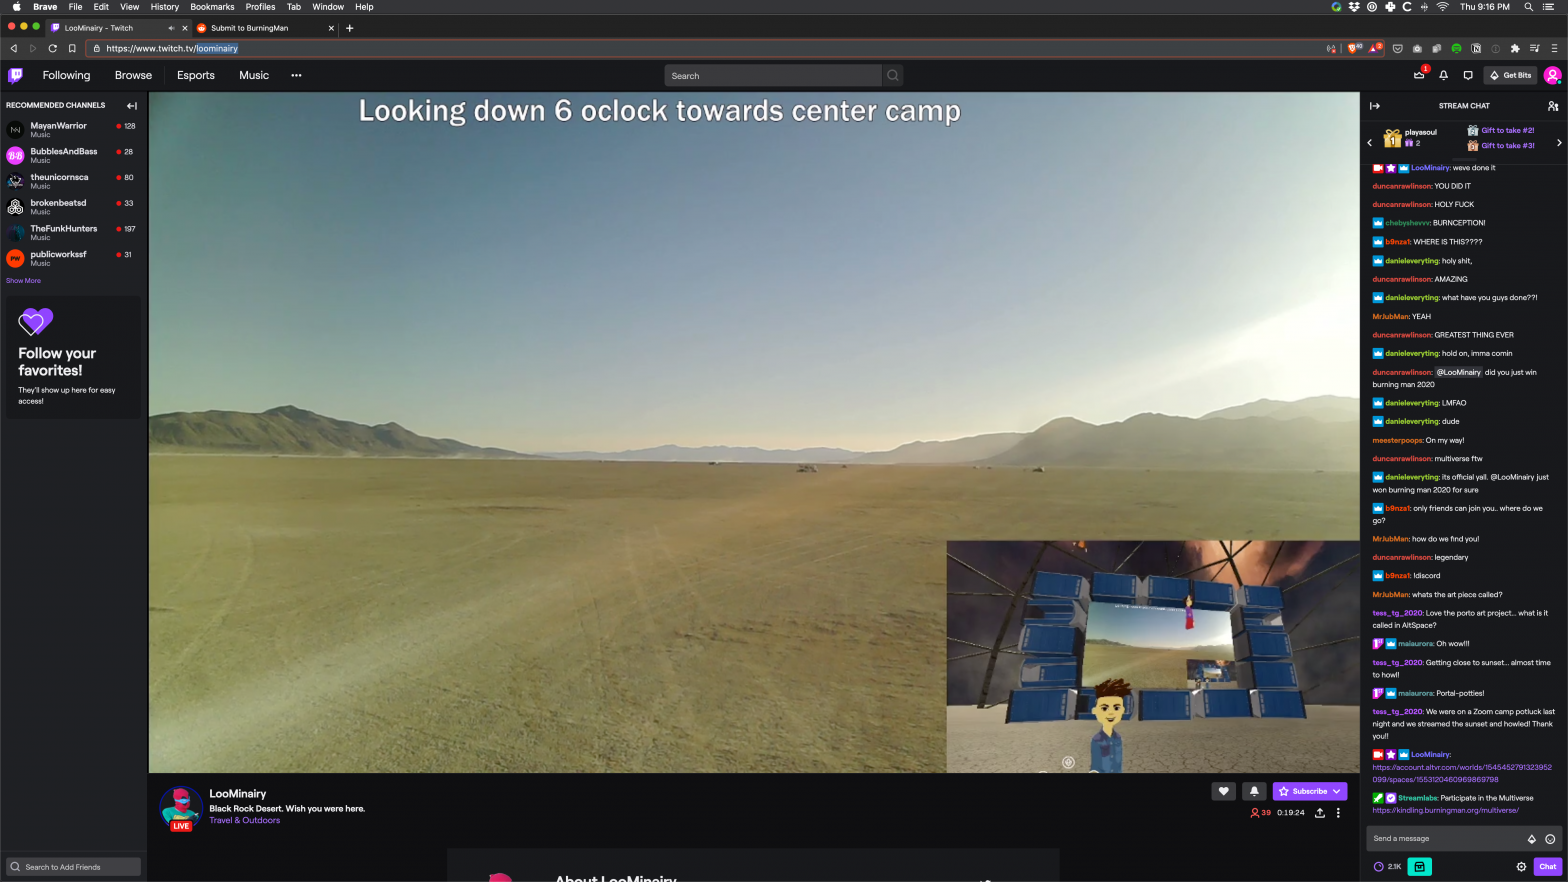 Burnception Live Streaming From The Playa in BRCvr